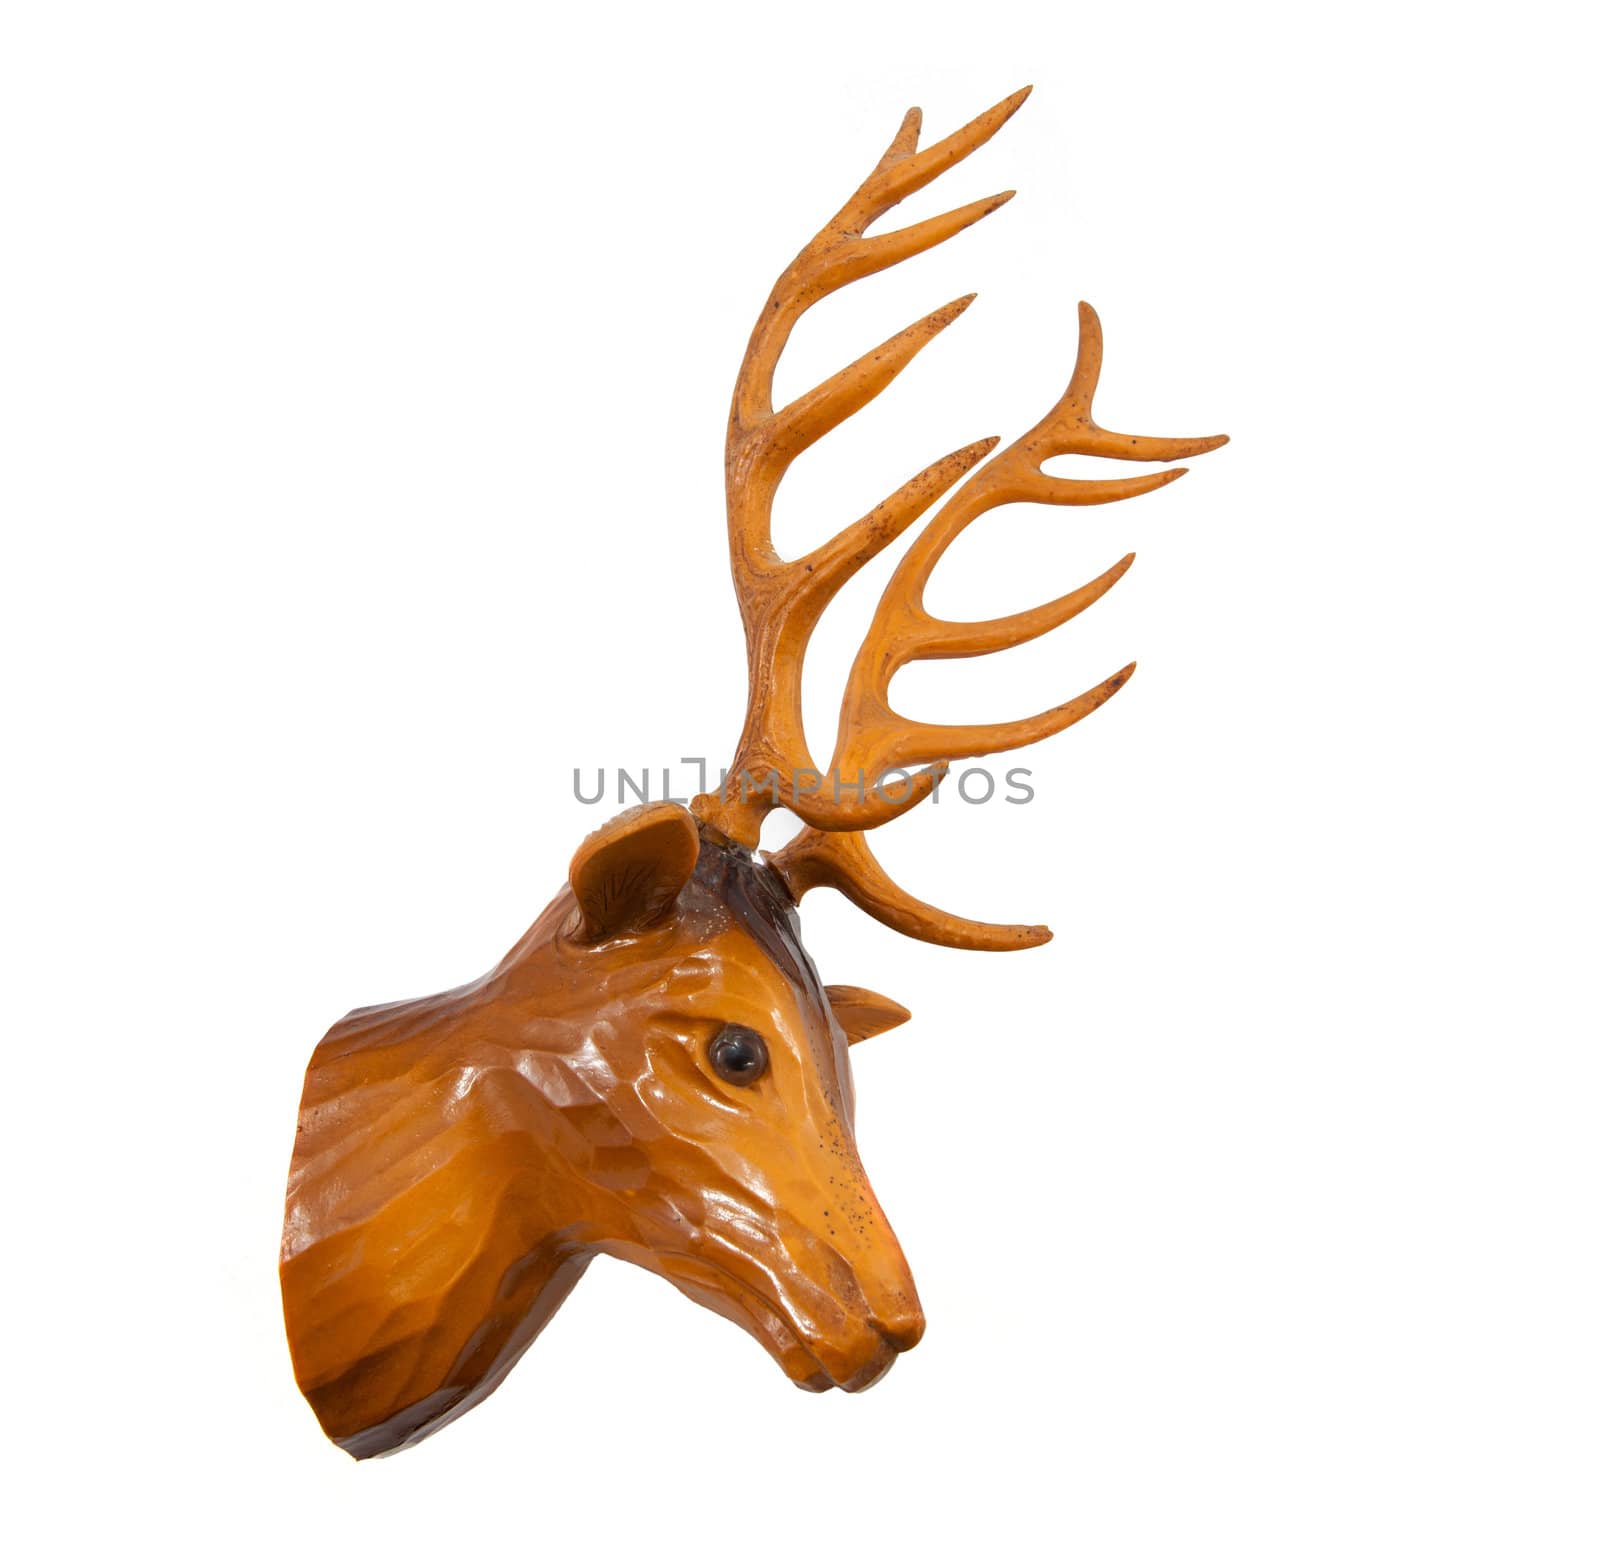 The deer wood vintage object on white background